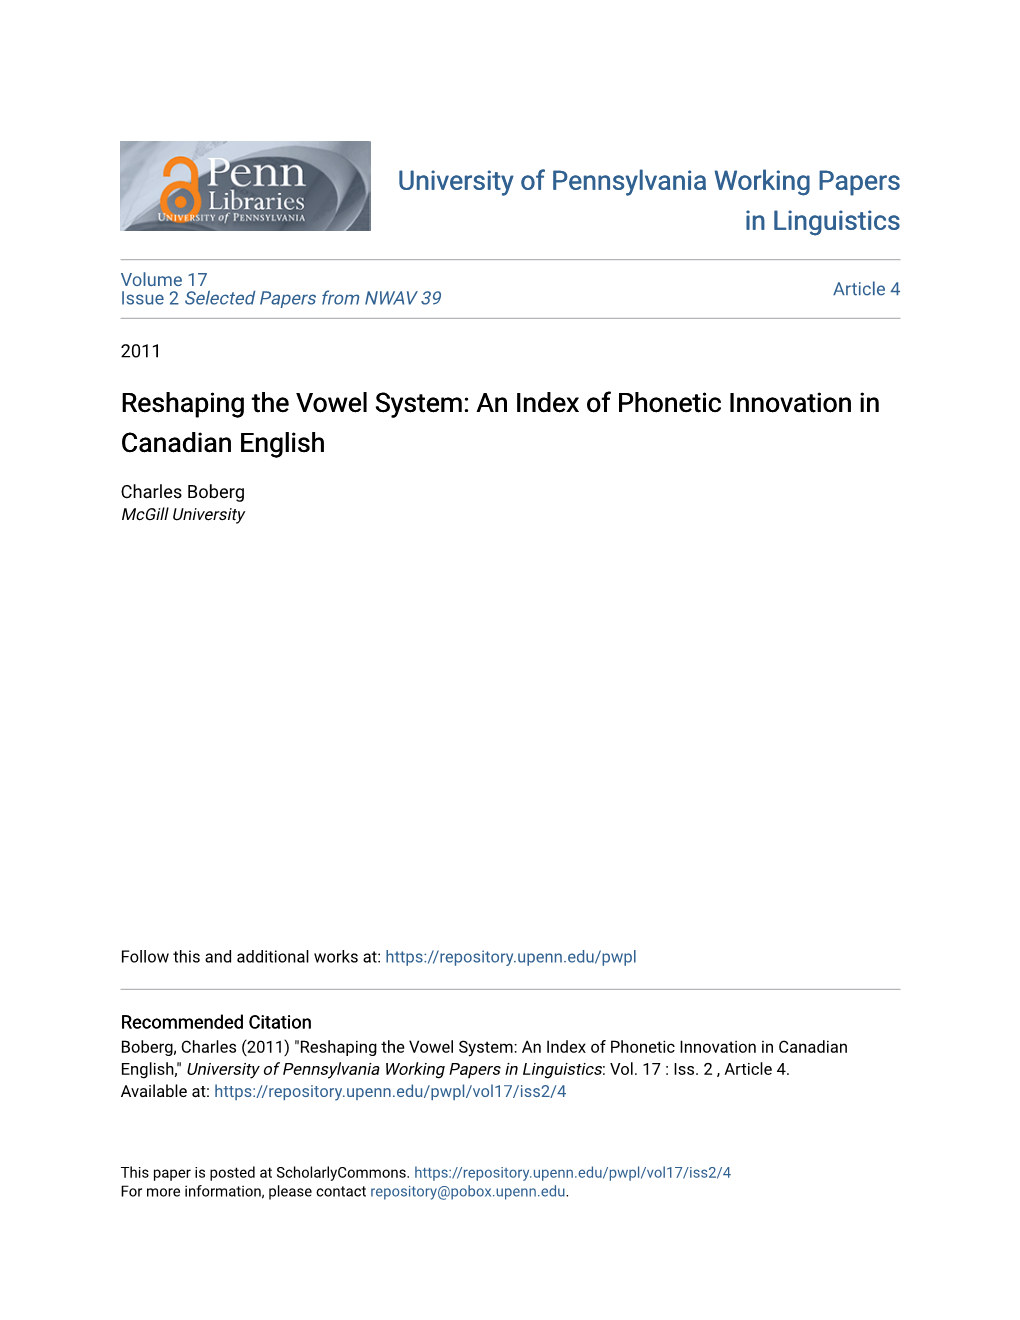 Reshaping the Vowel System: an Index of Phonetic Innovation in Canadian English